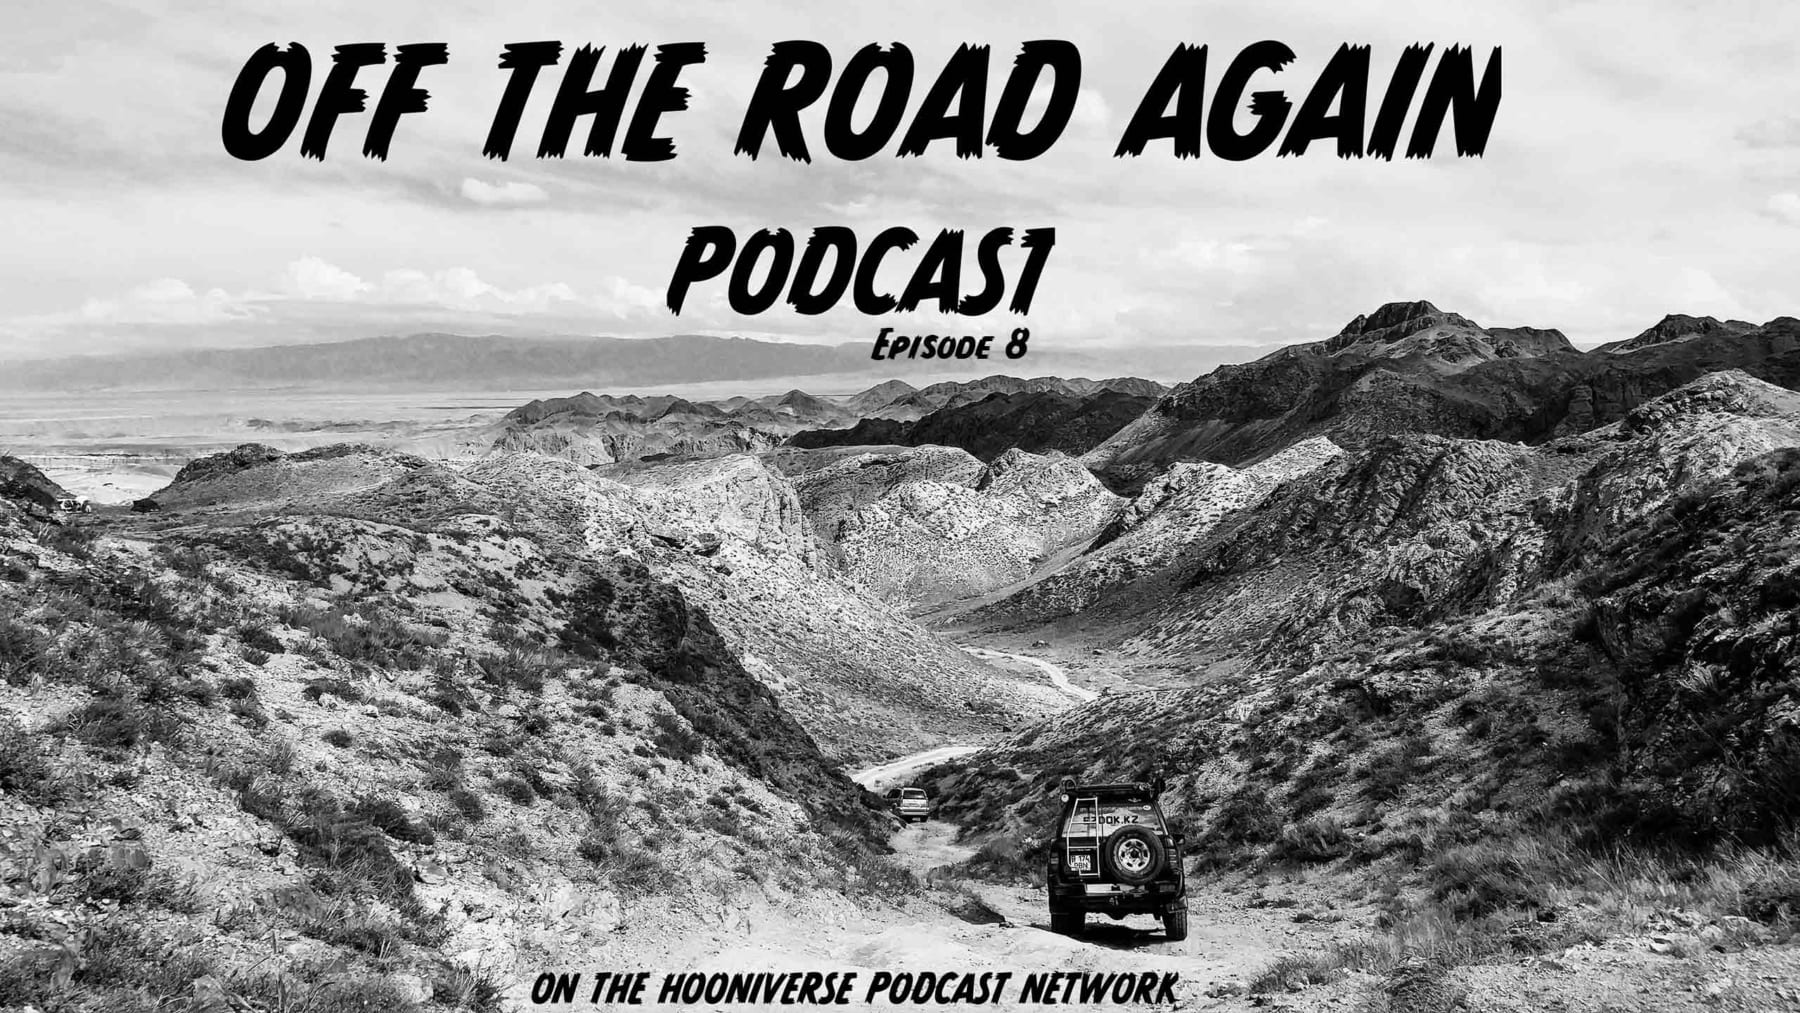 Off the Road Again Podcast: Episode 8